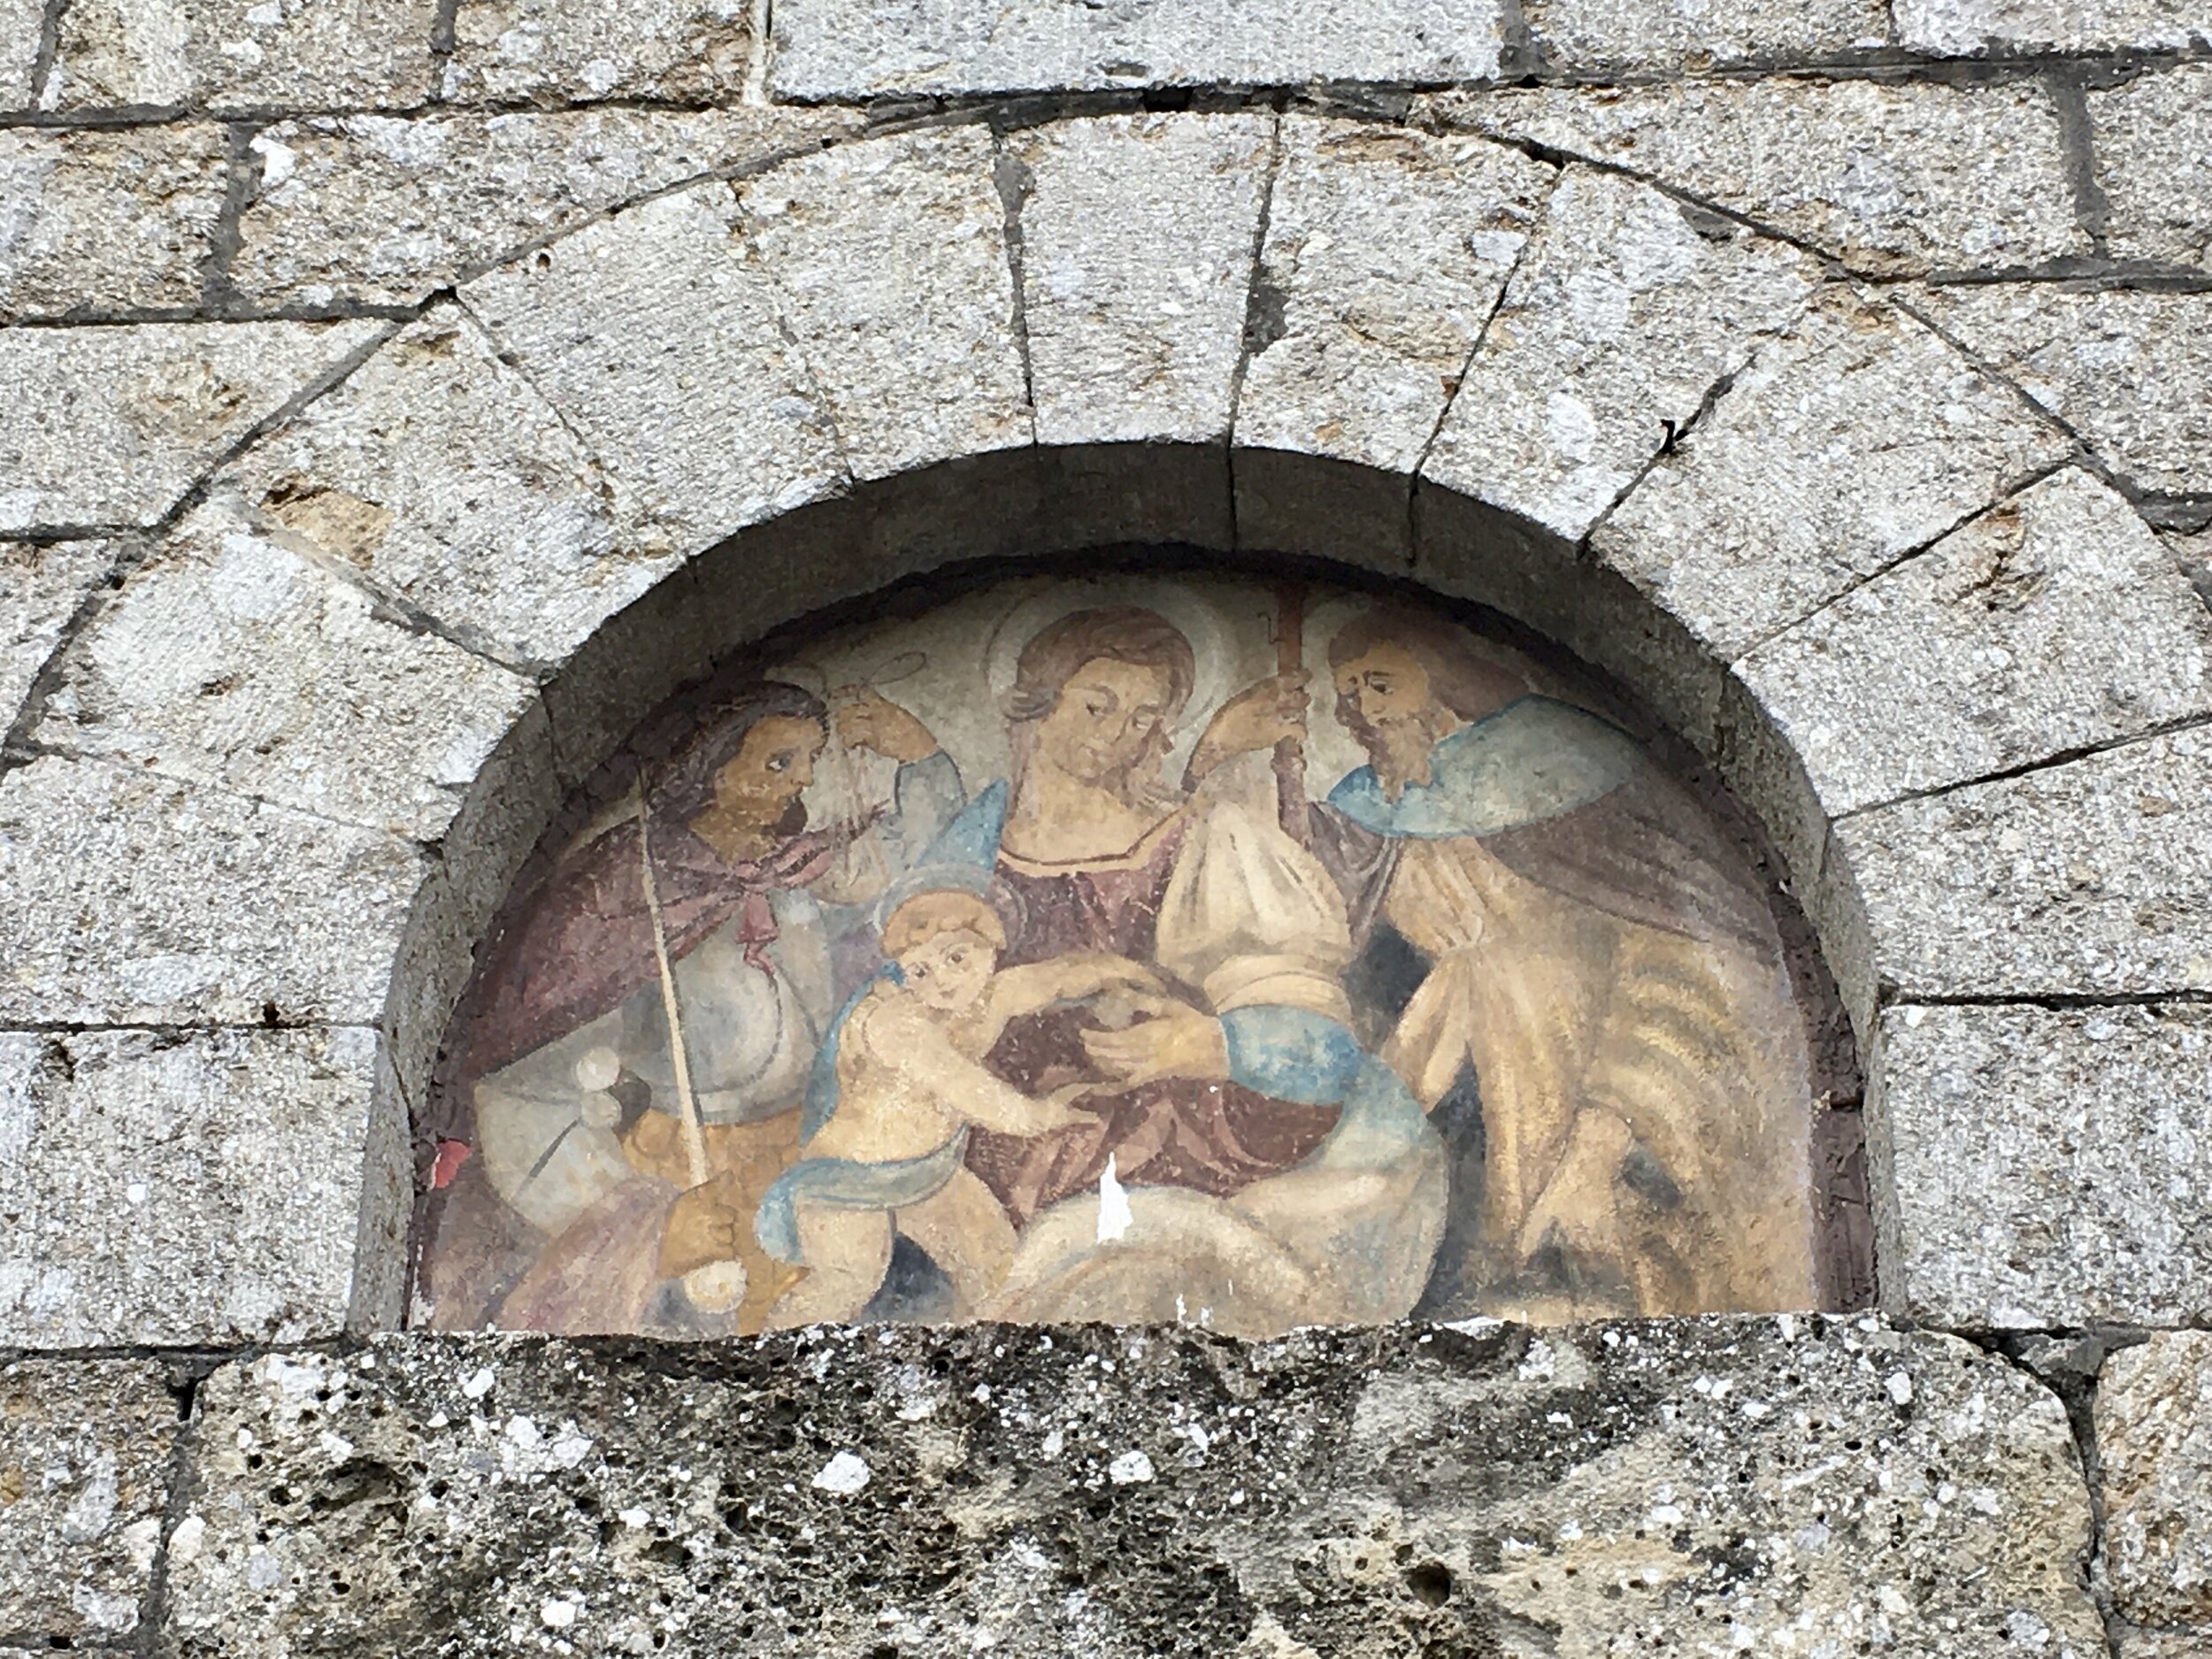 Over the entrance to Chiesa di San Michele Arcangelo